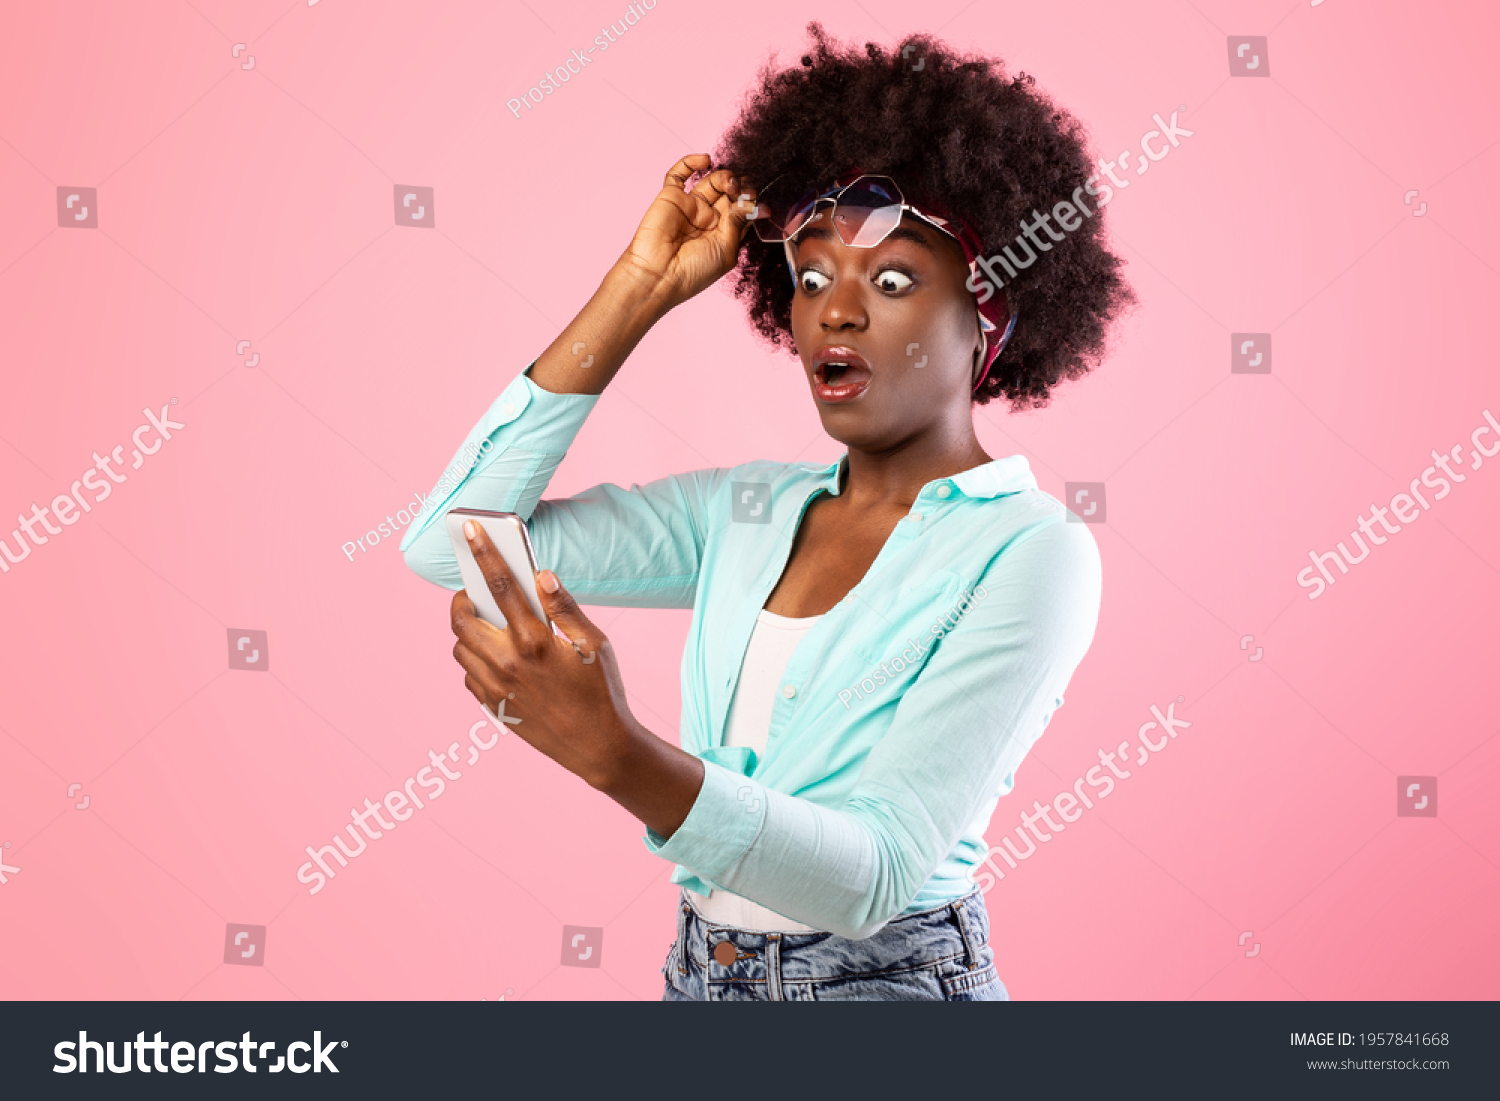 Wow Application. Extremely Shocked African Woman Looking At Smartphone Reading Message With Exciting Shocking News Holding Eyeglasses Posing Over Pink Studio Background. New Mobile App For Phone #1957841668